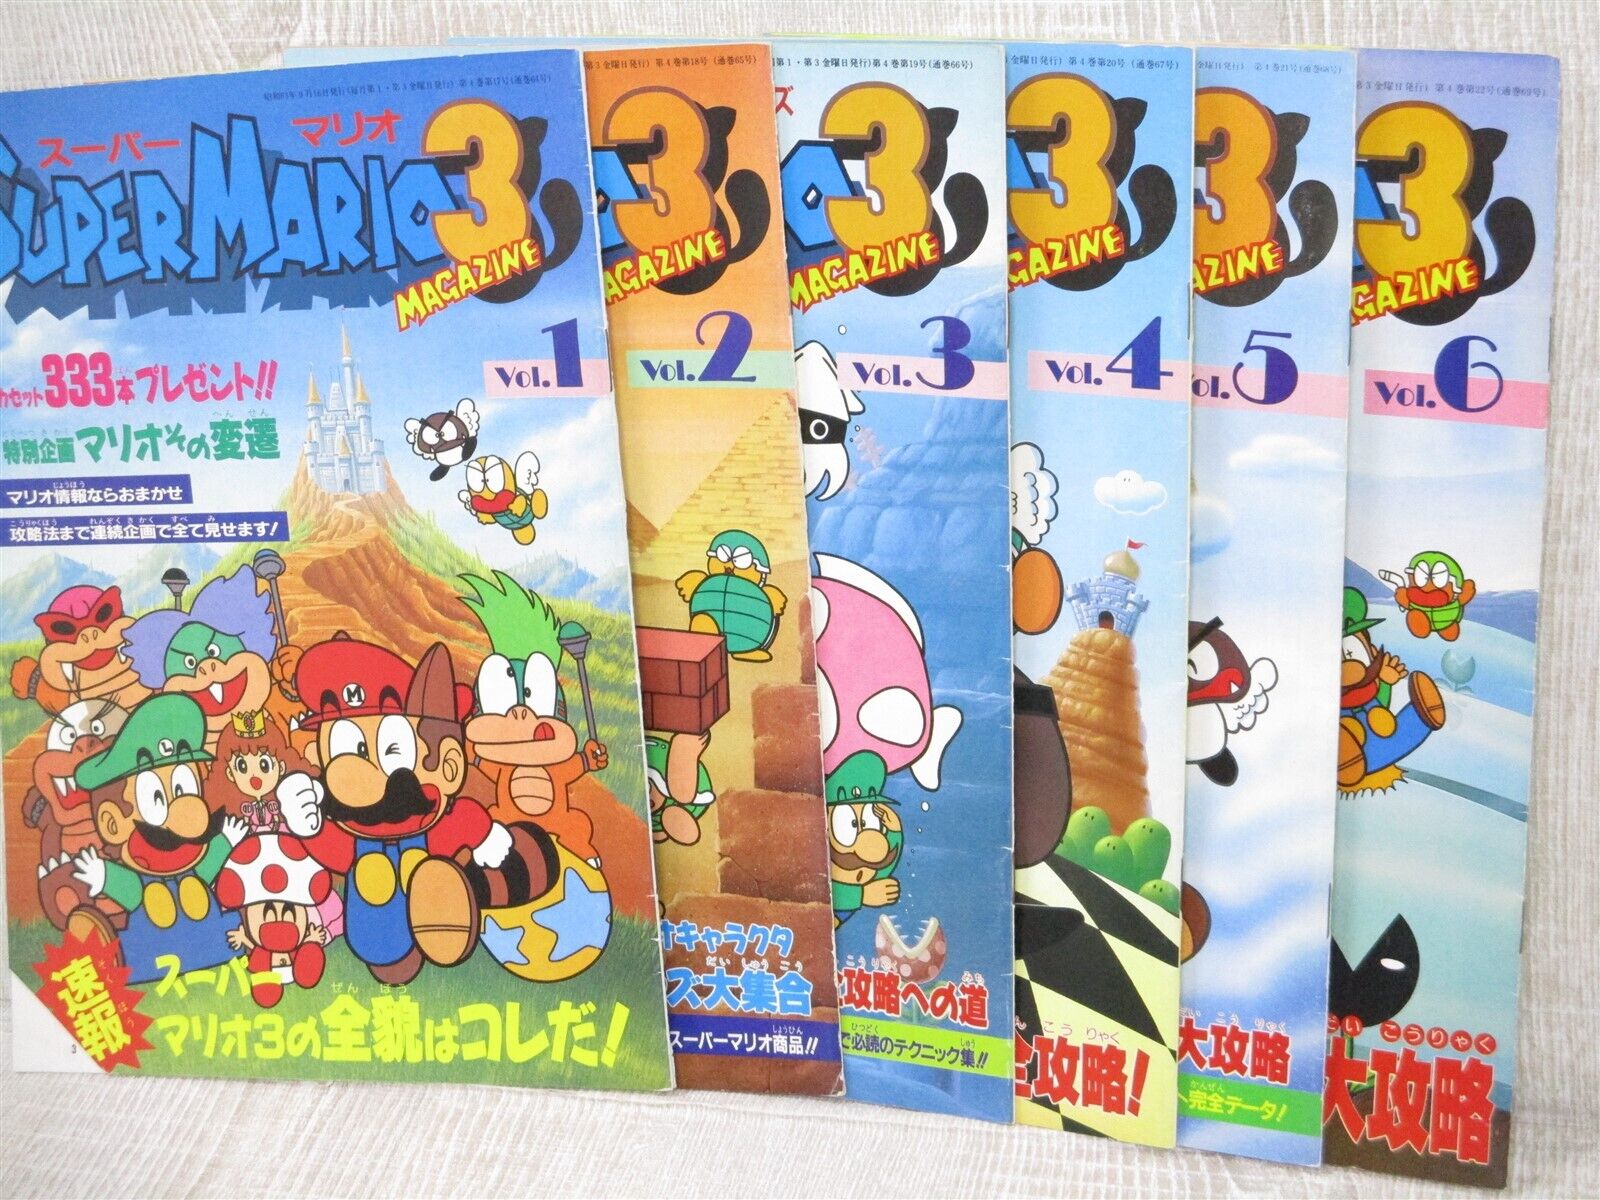 SUPER MARIO BROTHERS 3 Ltd Booklet Set 1-6 Famicom Guide Book 1988 See Condition